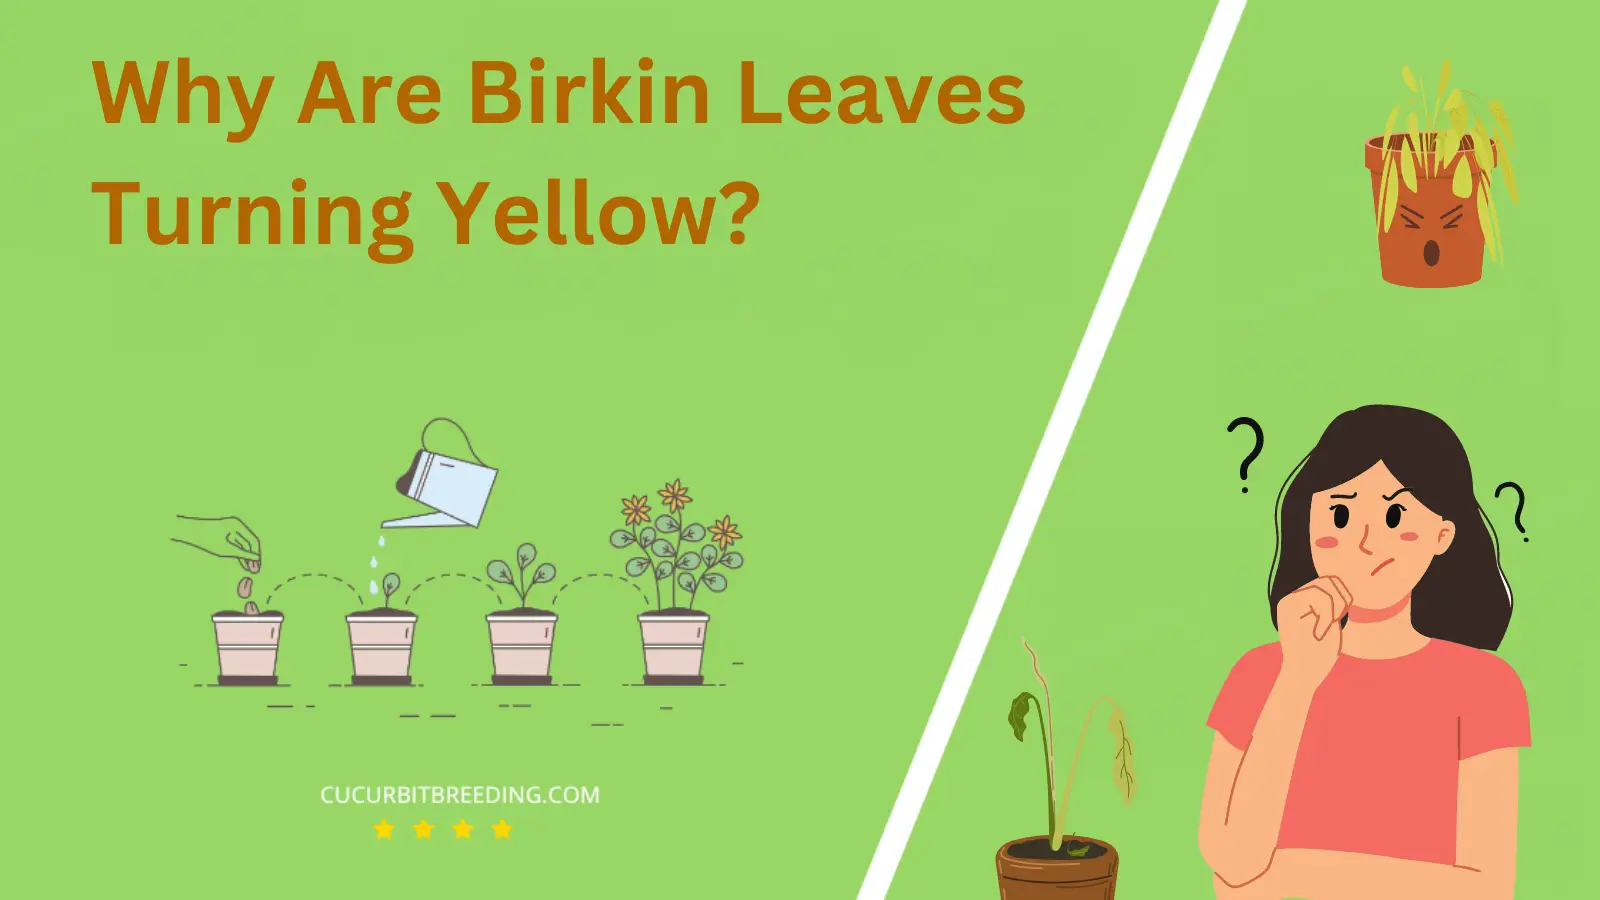 Why Are Birkin Leaves Turning Yellow